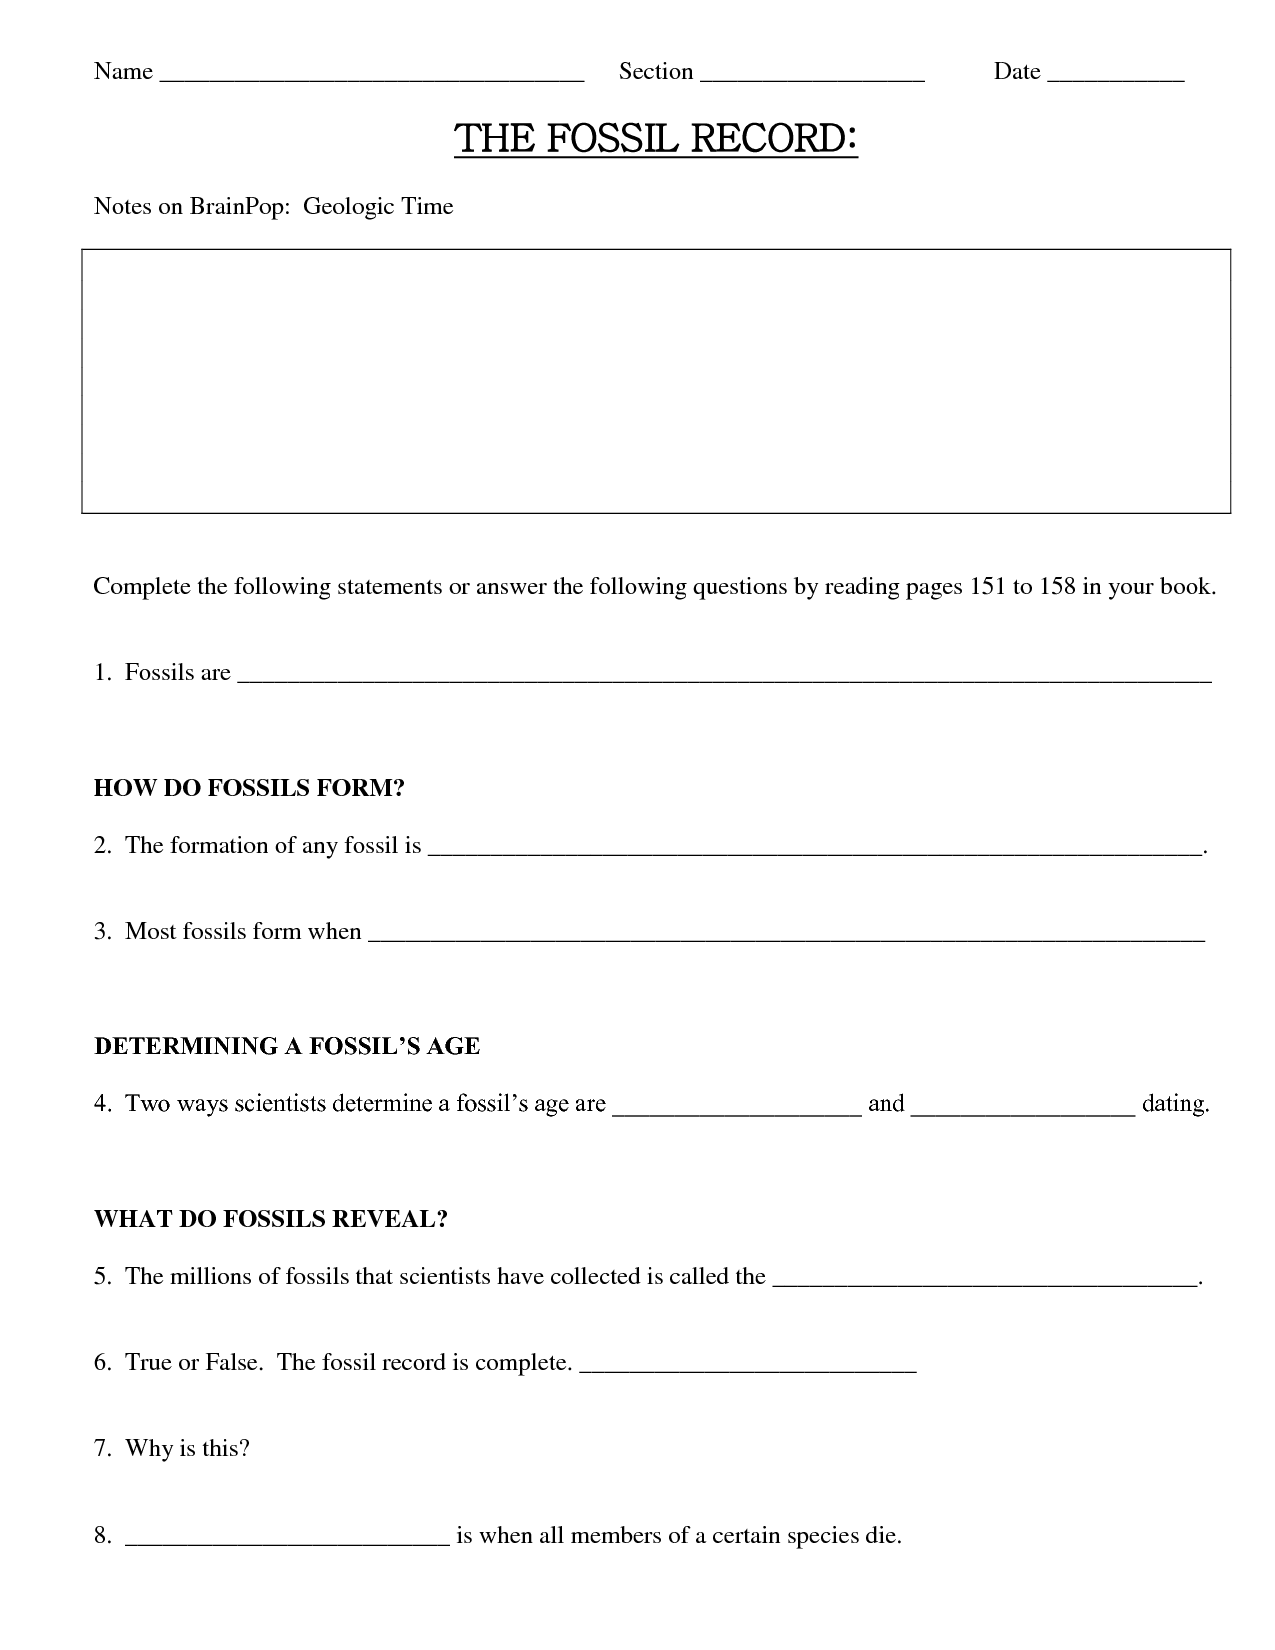 Fossil Record Worksheets